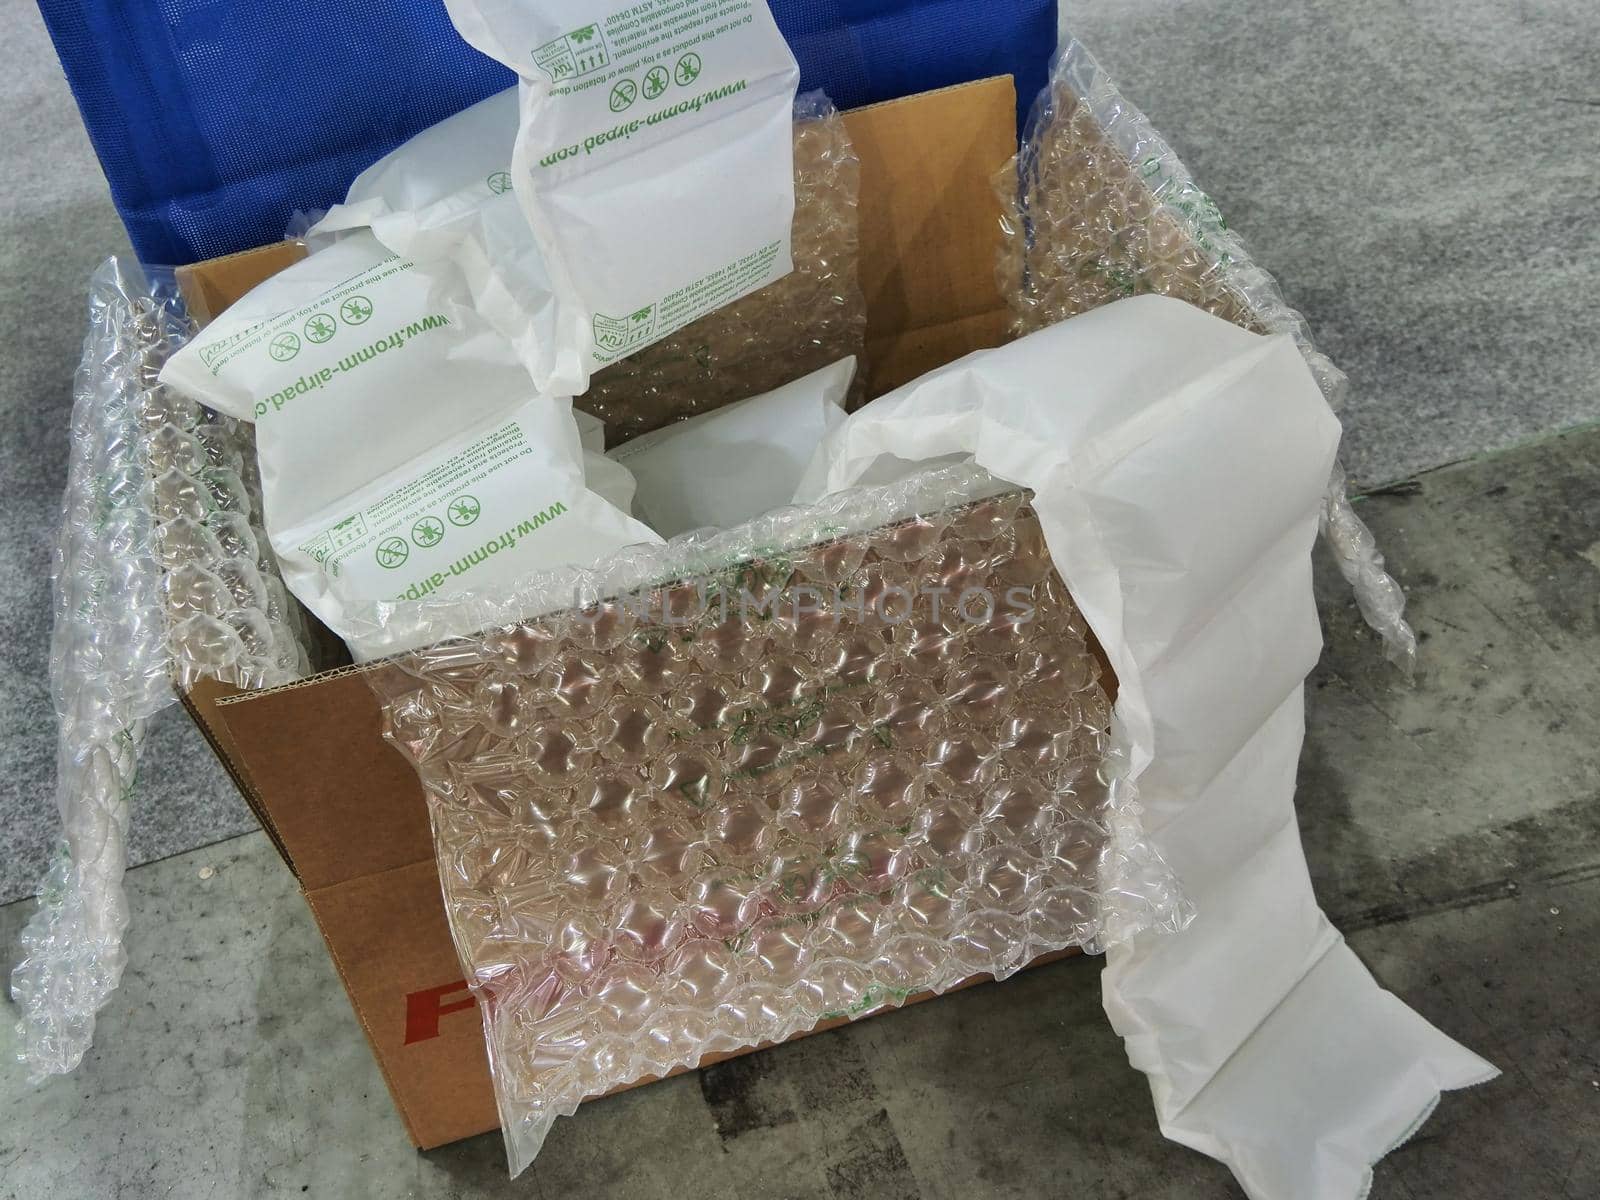 bubble wraps foils and packaging materials on display  Turin Italy February 13 2020 by lemar